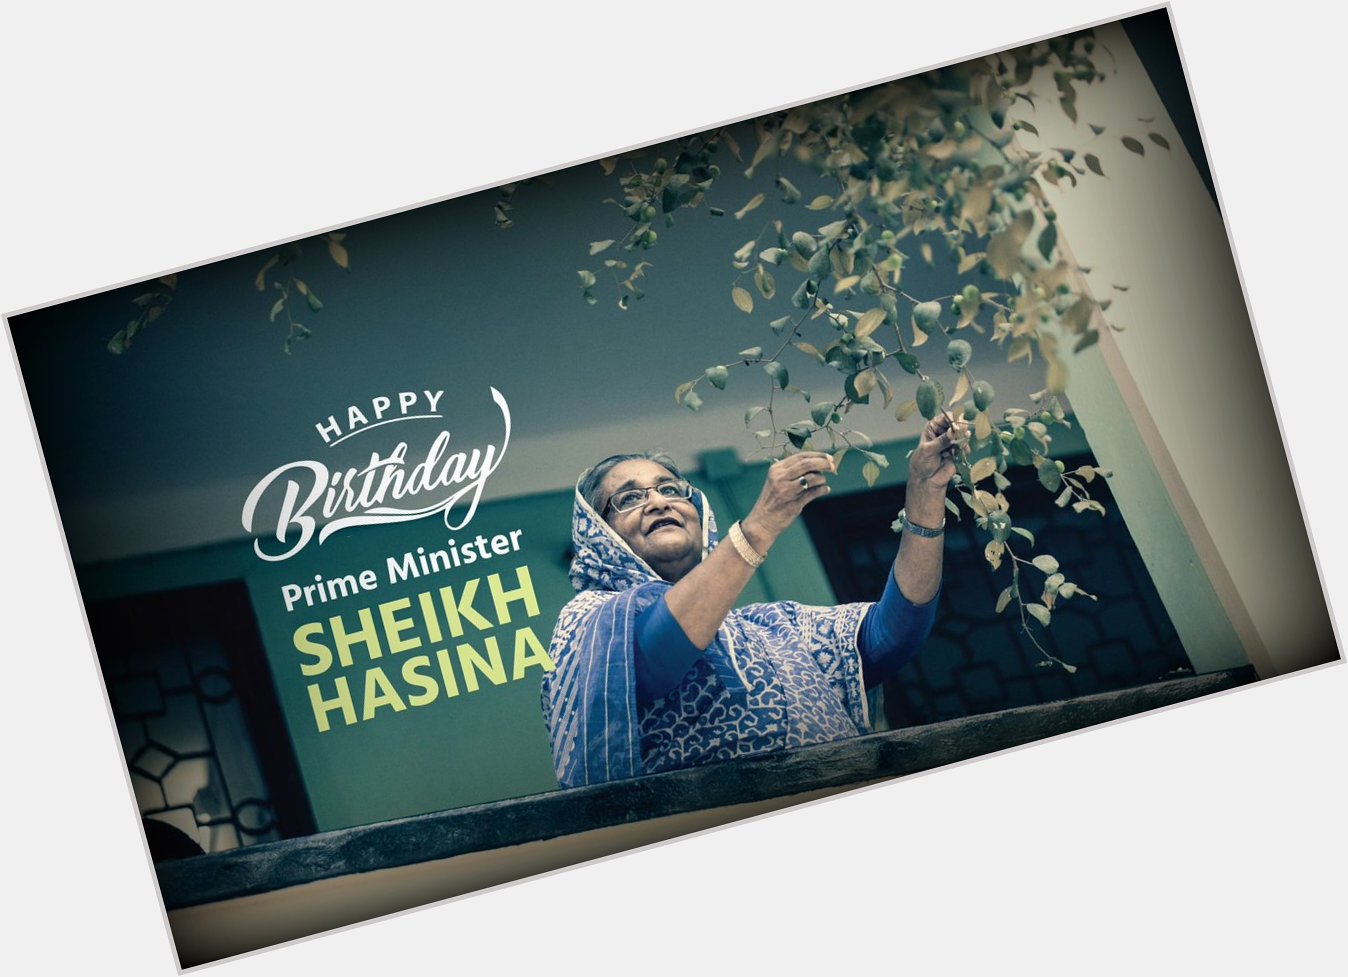 Happy Birthday, Our beloved Honorable Prime Minister Sheikh Hasina!  